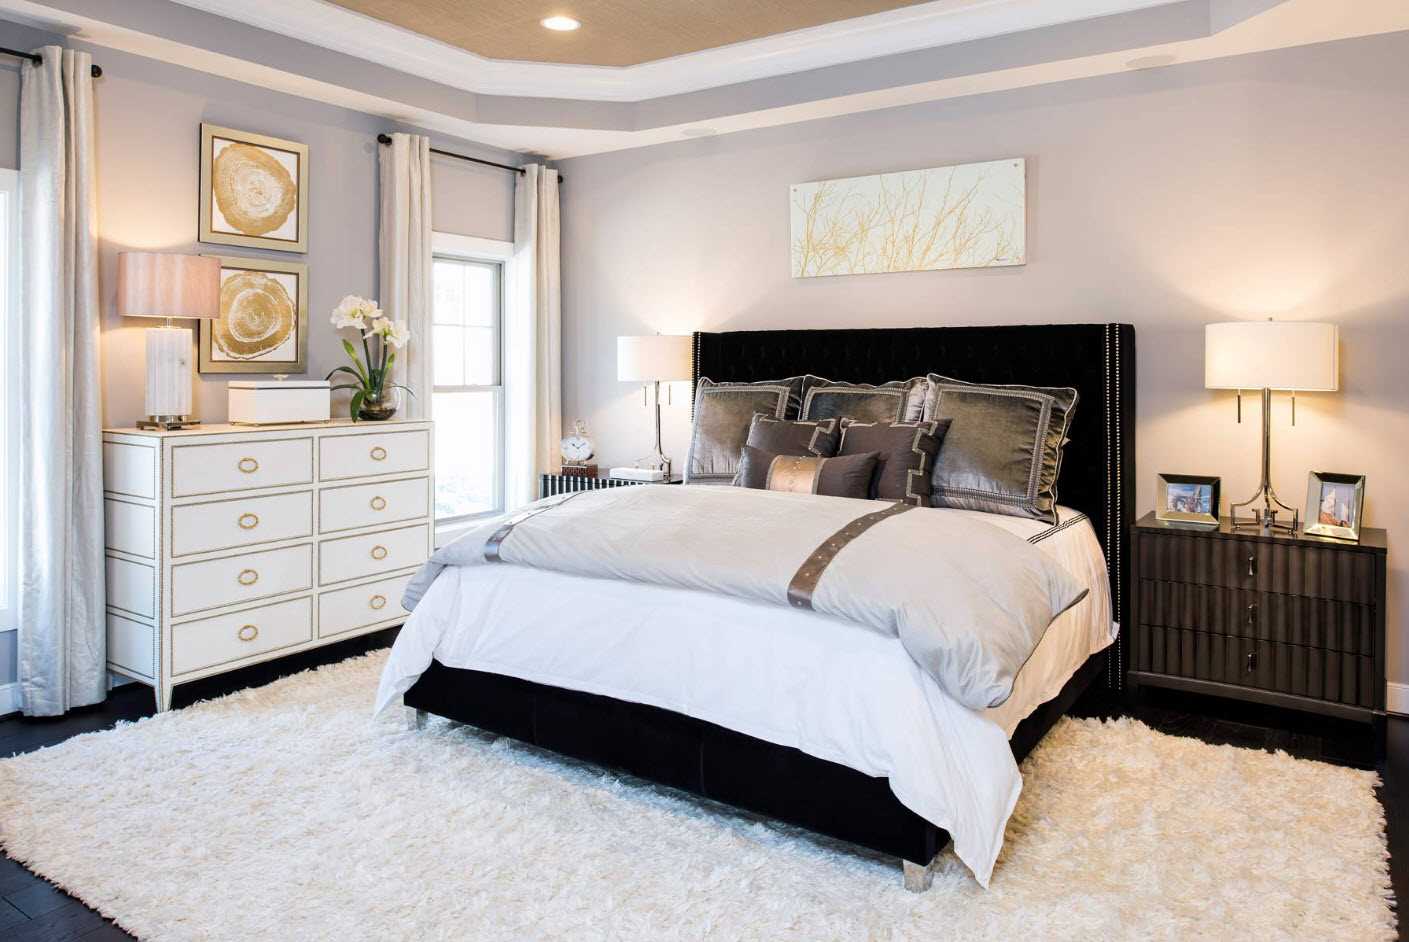 the idea of ​​brightly decorating the bedroom design